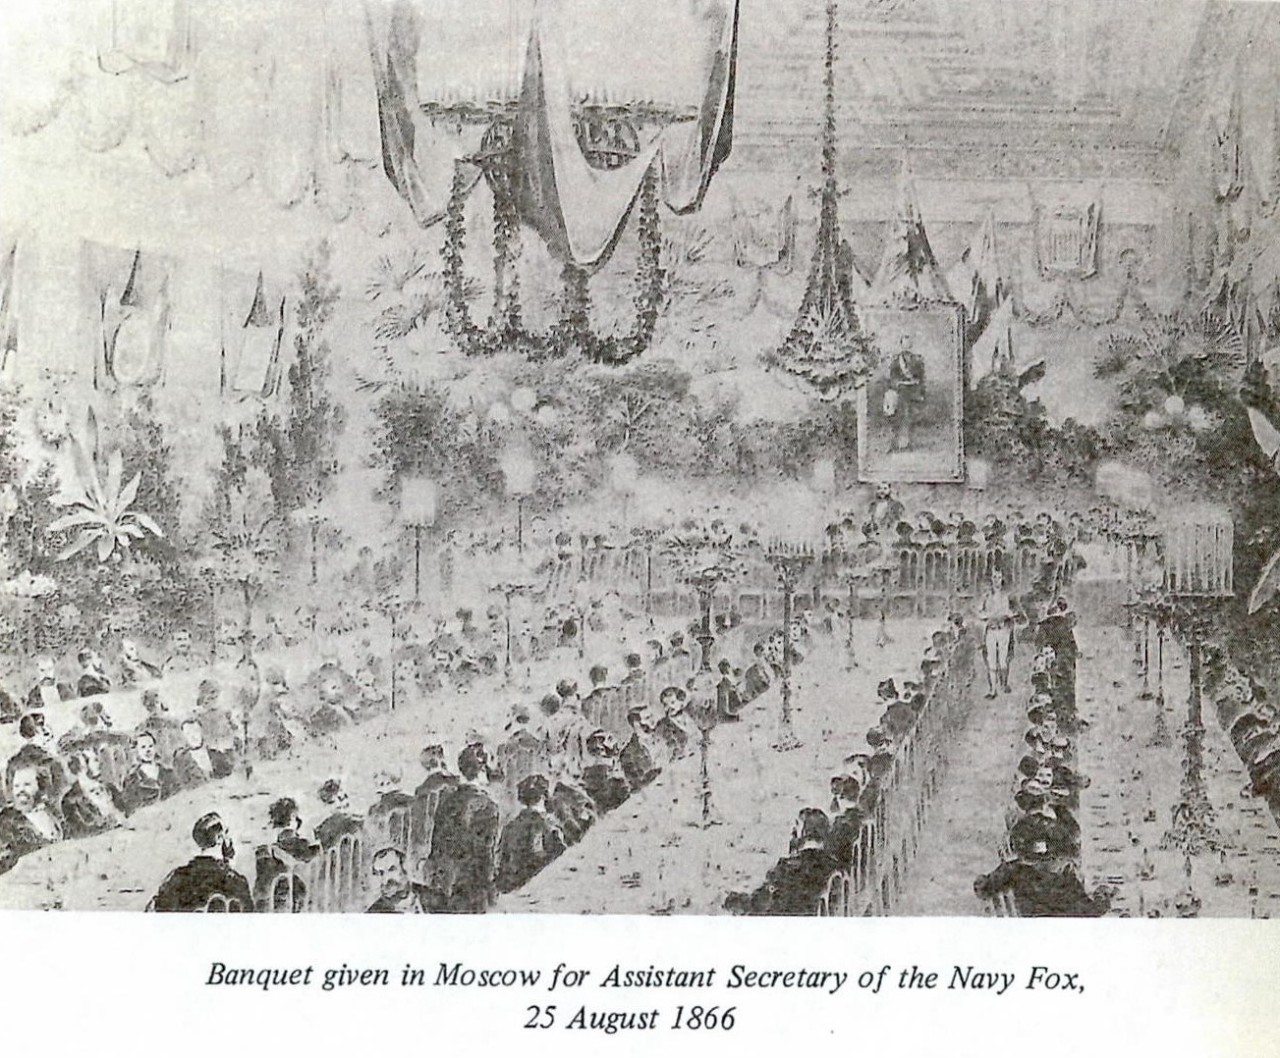 Banquet given Moscow for Assistant SEcretary of the Navy Fox, 25 August 1866